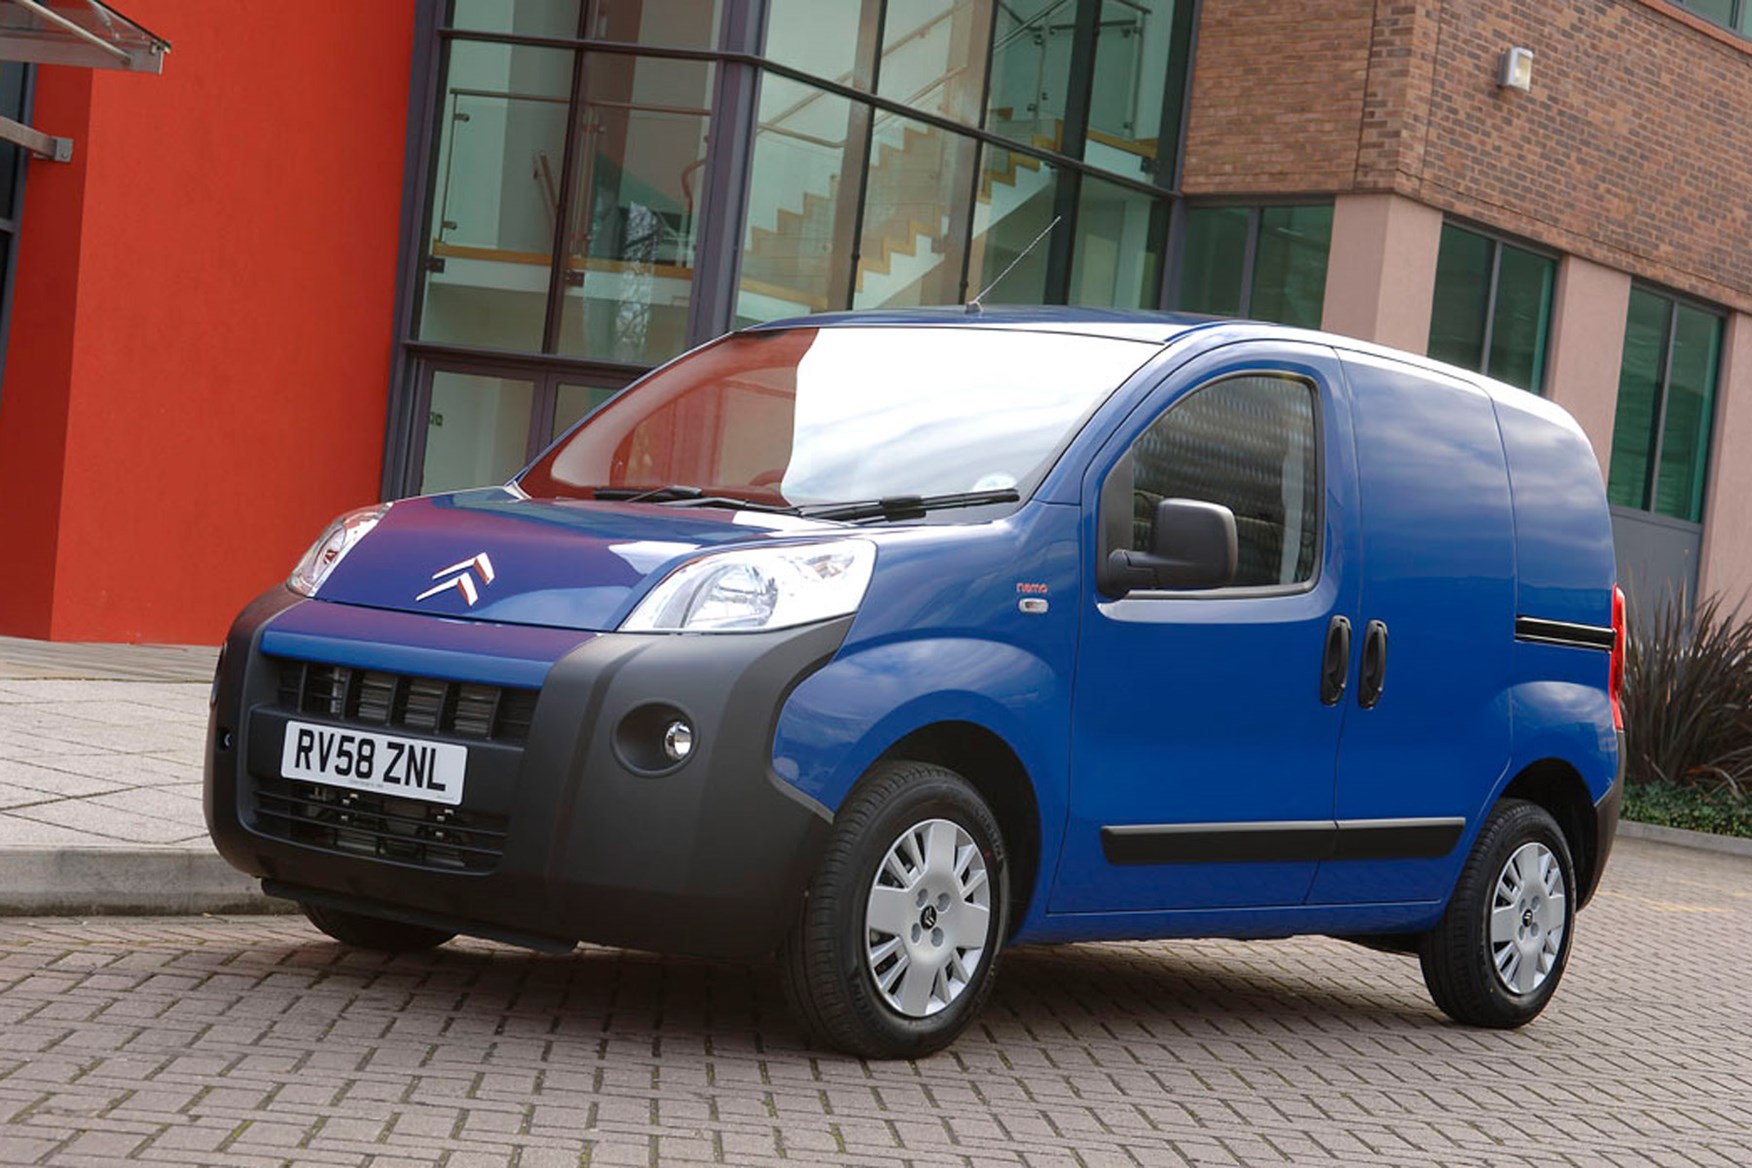 Citroen Nemo review and buying guide - blue, front view